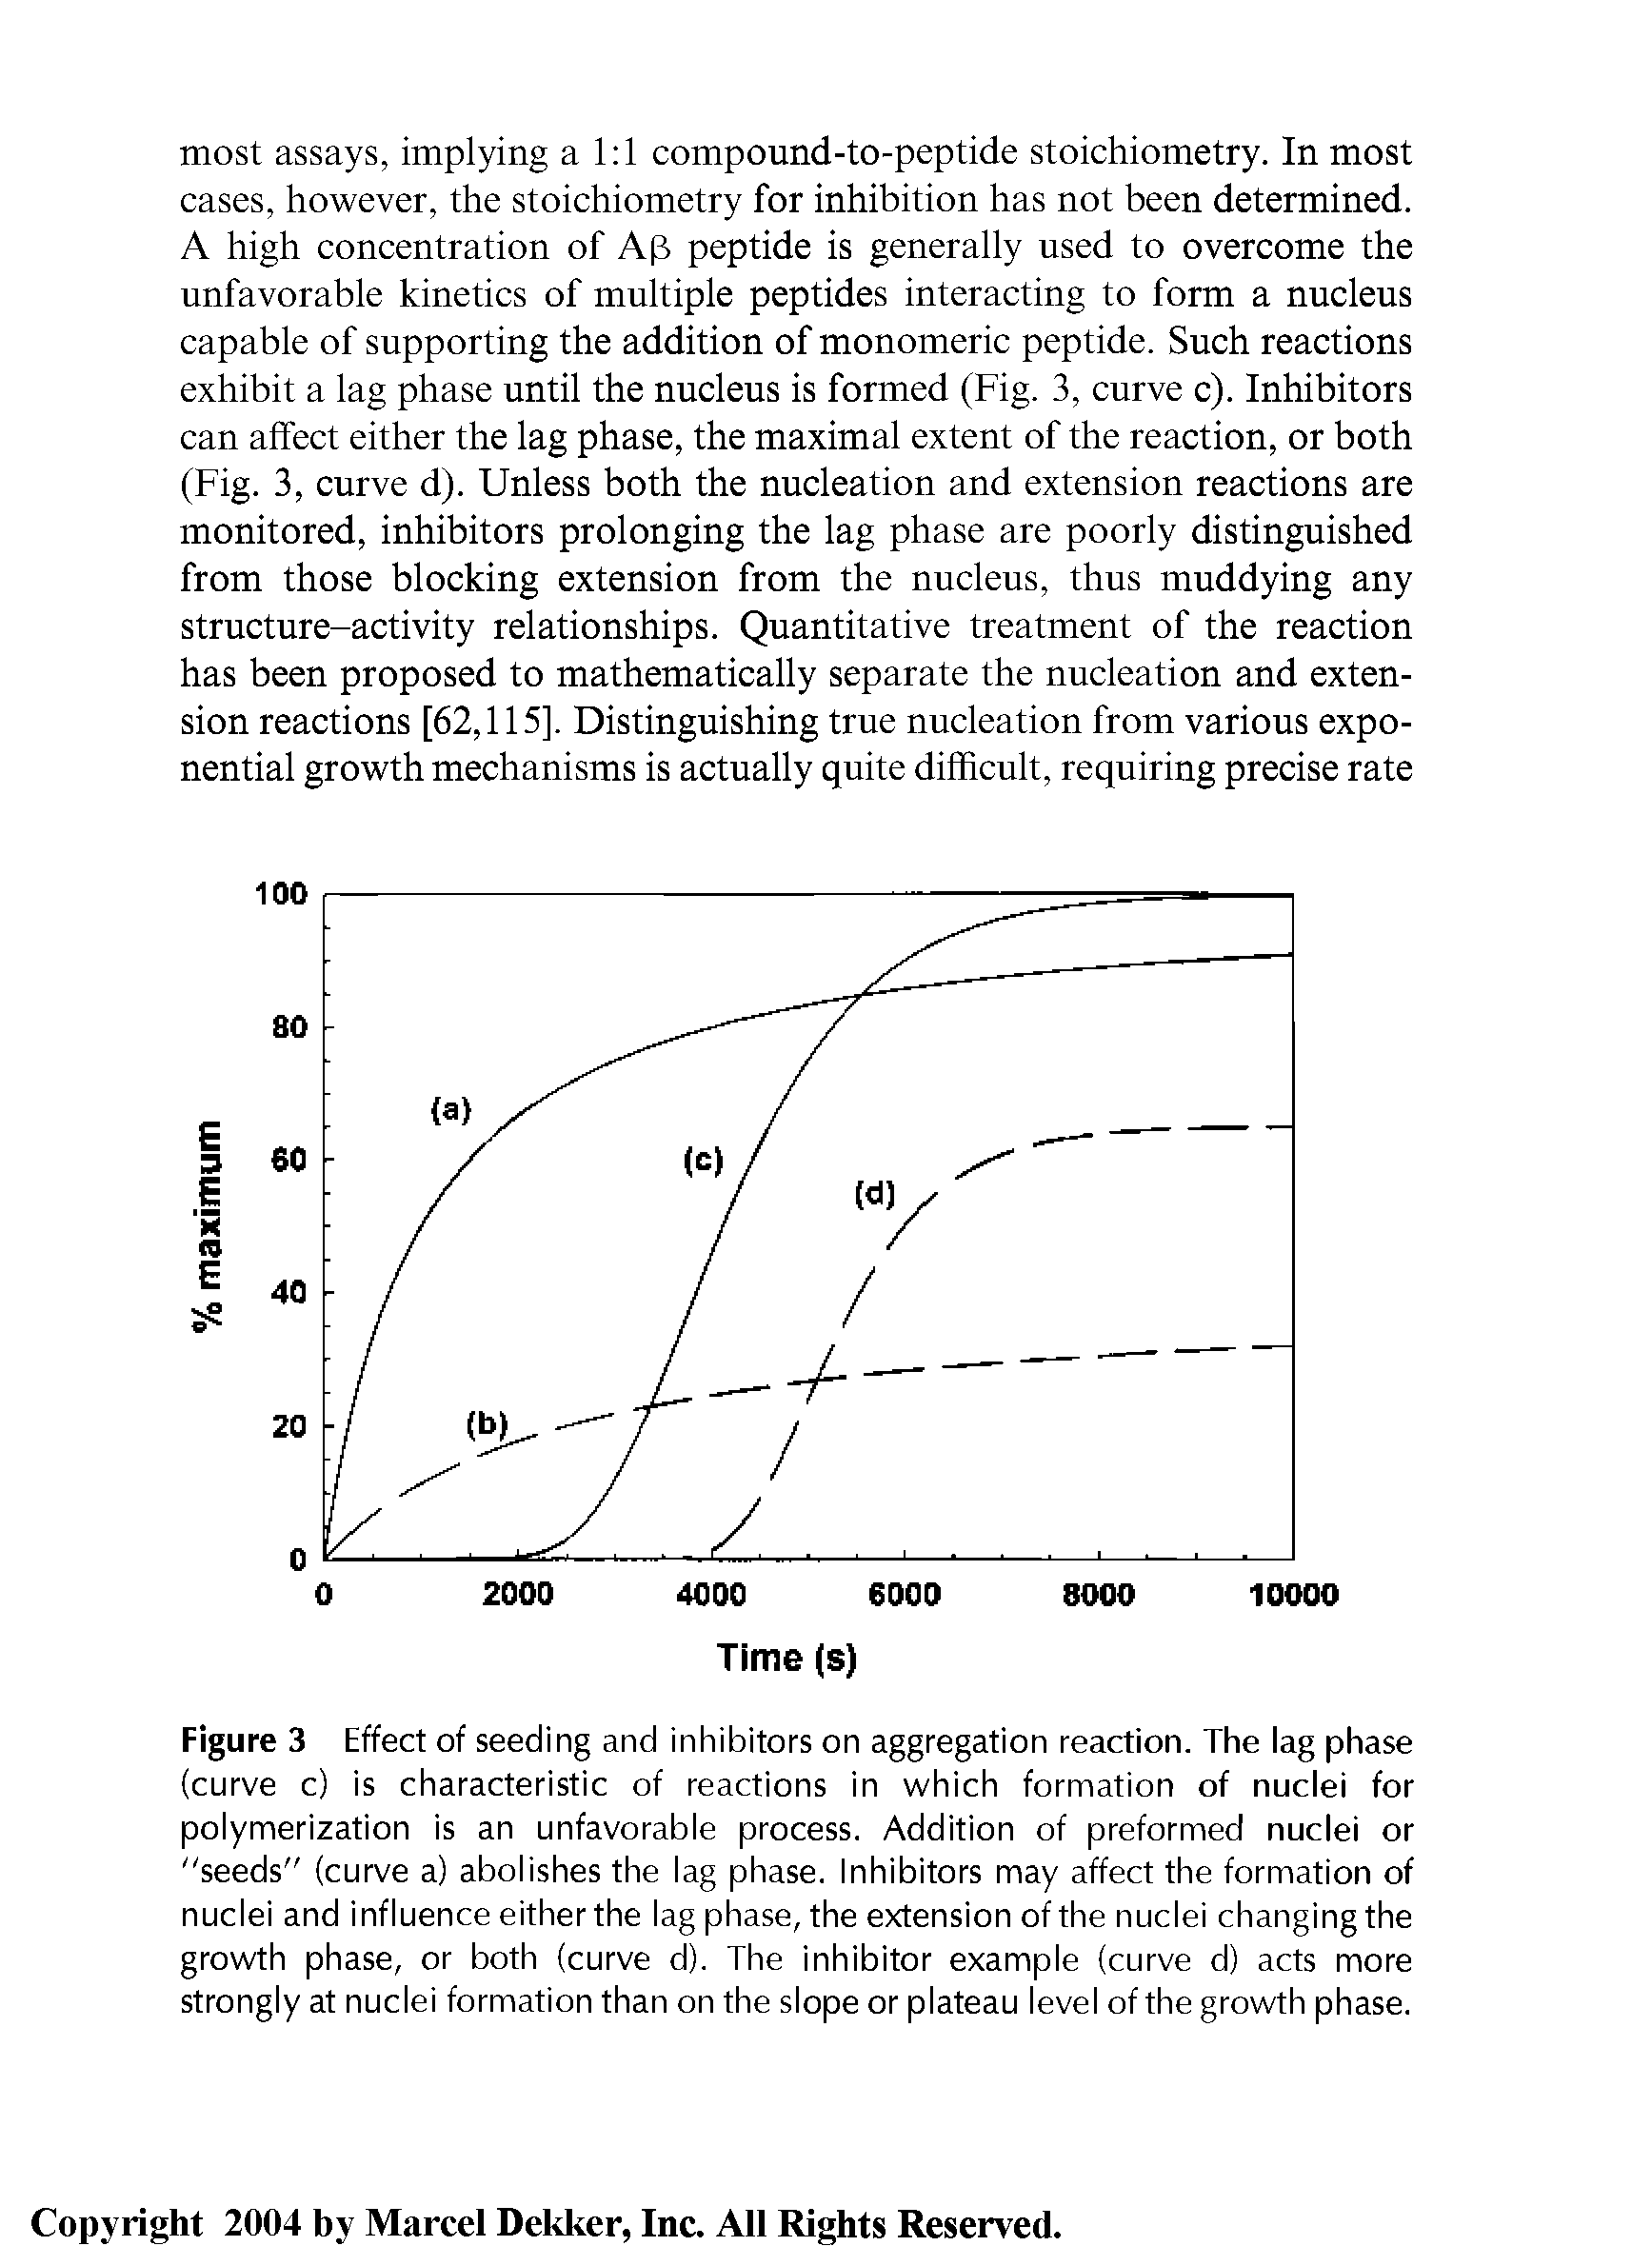 Figure 3 Effect of seeding and inhibitors on aggregation reaction. The lag phase (curve c) is characteristic of reactions in which formation of nuclei for polymerization is an unfavorable process. Addition of preformed nuclei or seeds" (curve a) abolishes the lag phase. Inhibitors may affect the formation of nuclei and influence eitherthe lag phase, the extension of the nuclei changing the growth phase, or both (curve d). The inhibitor example (curve d) acts more strongly at nuclei formation than on the slope or plateau level of the growth phase.